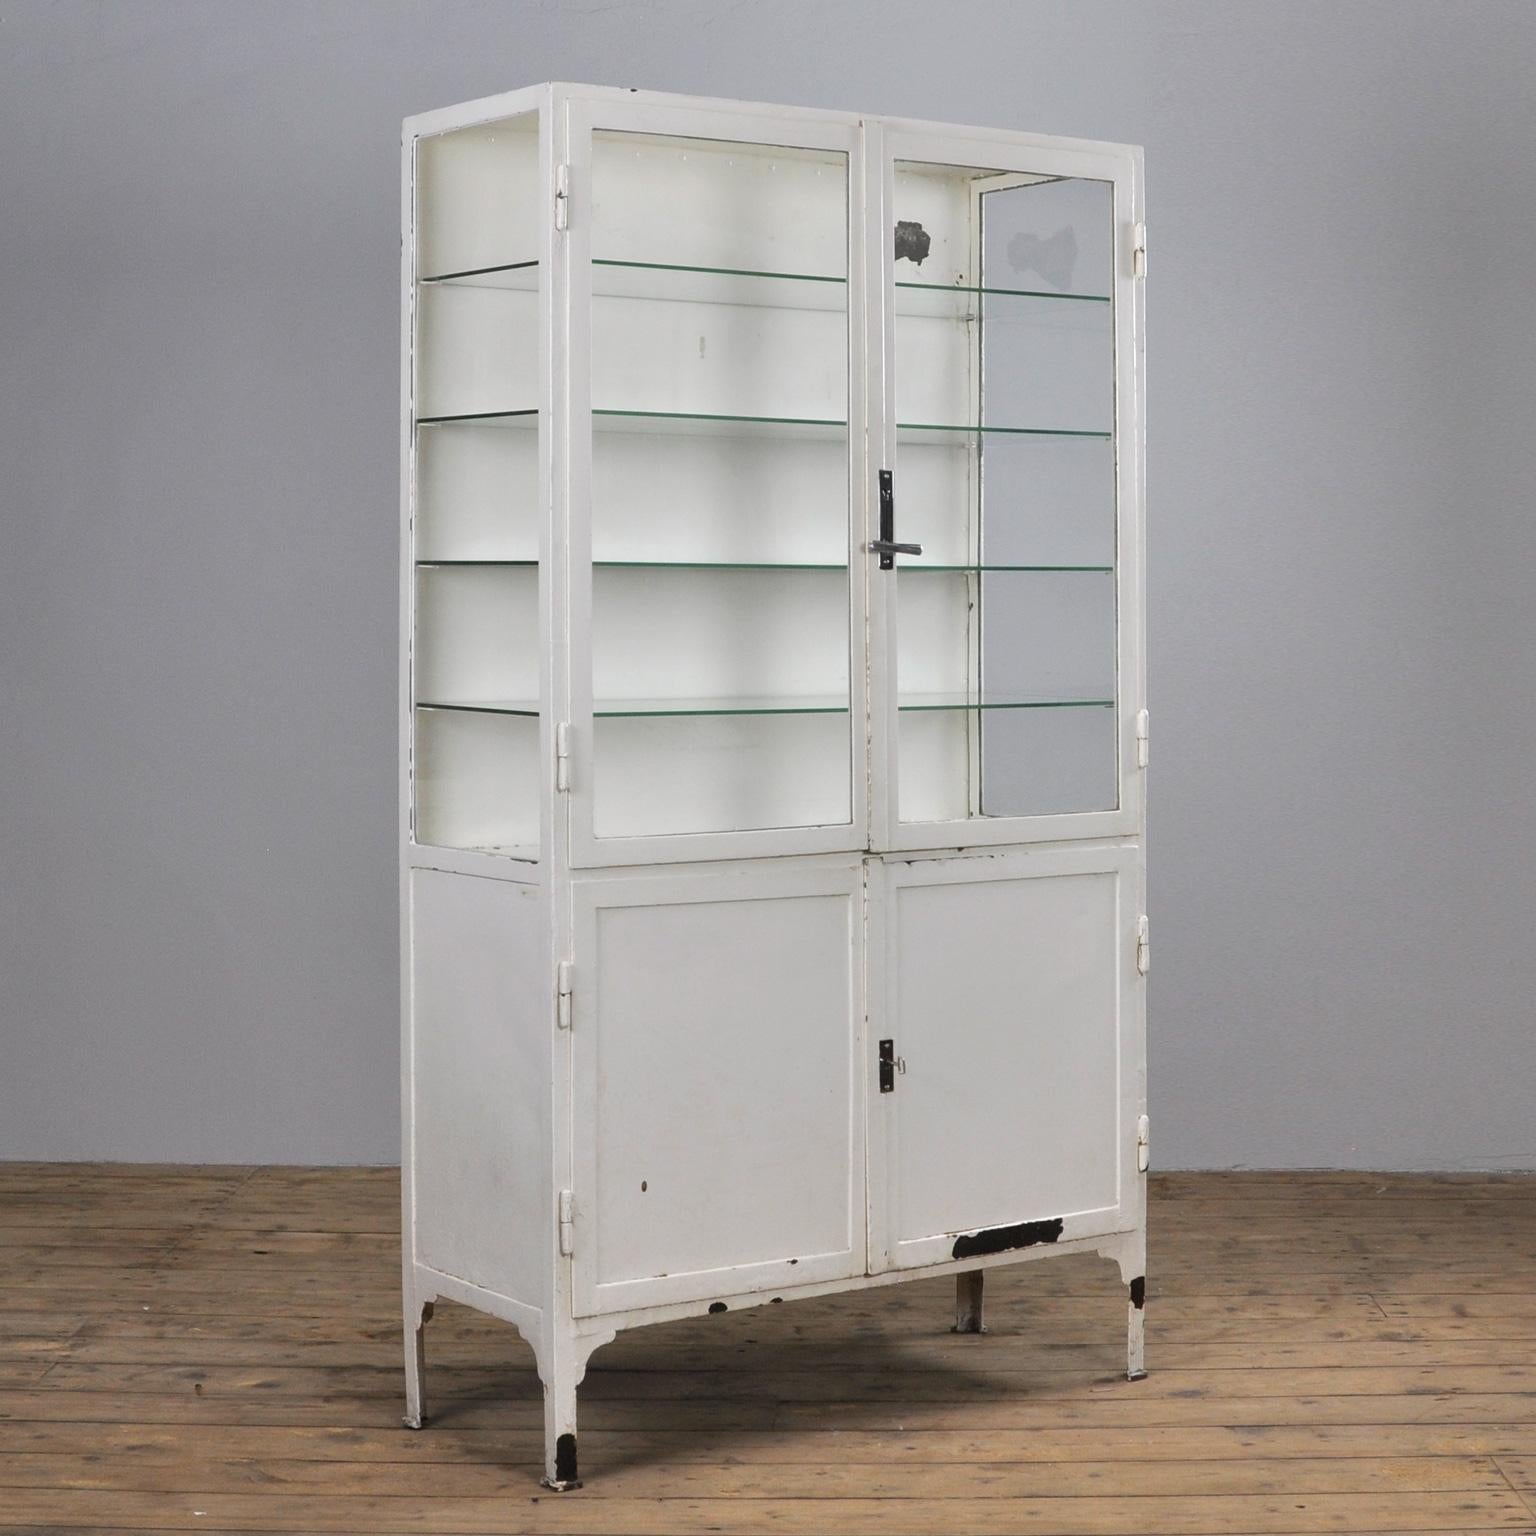 This former medical cabinet was produced in the 1940s in Hungary. It is made of thick iron and antique glass. In the upper part, there are four new glass shelves. The original locks are in perfect working condition.